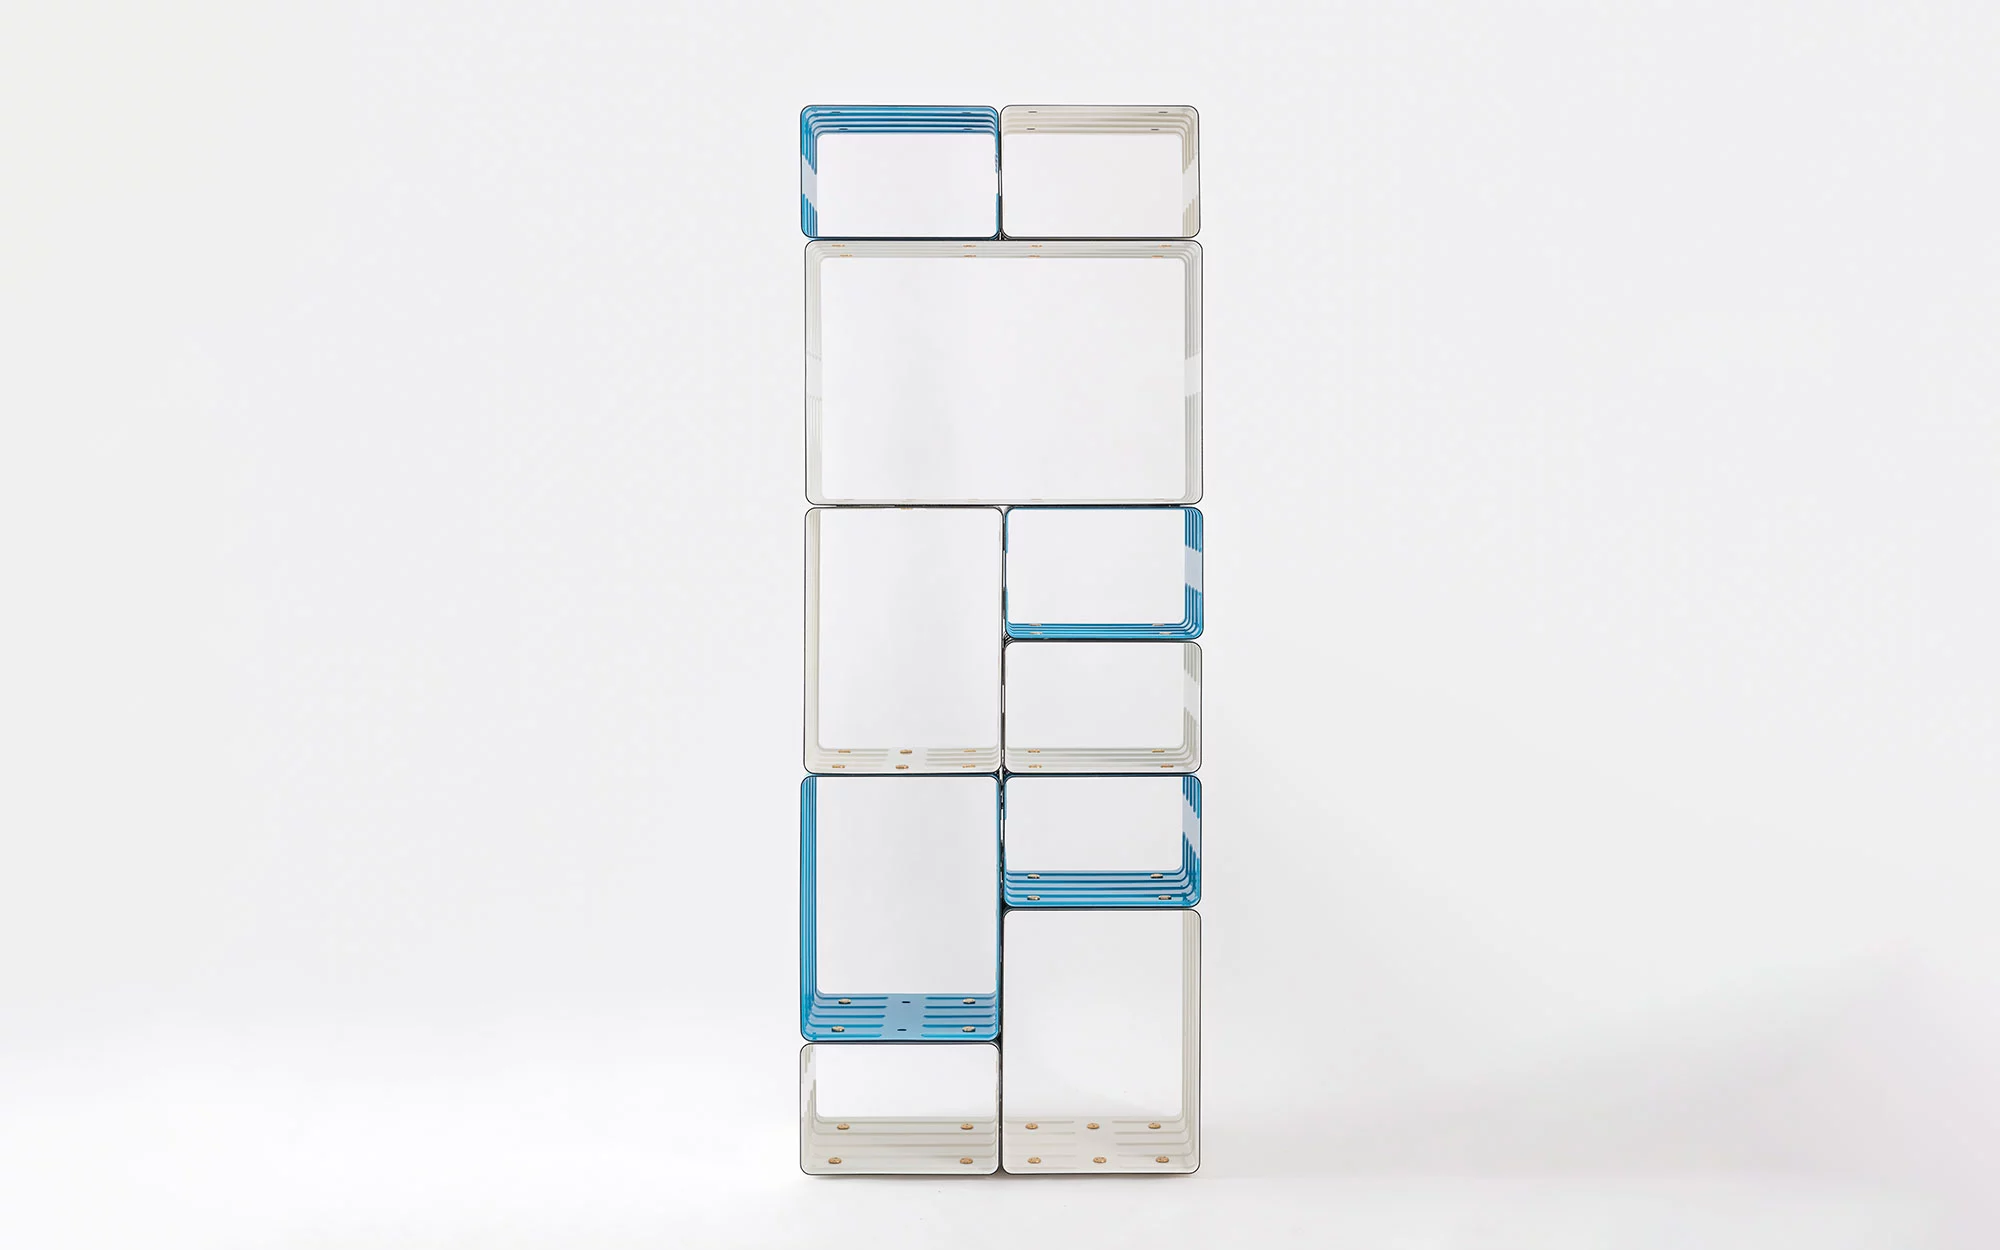 Quobus 1,3,6 two-colored - Marc Newson - Storage - Galerie kreo